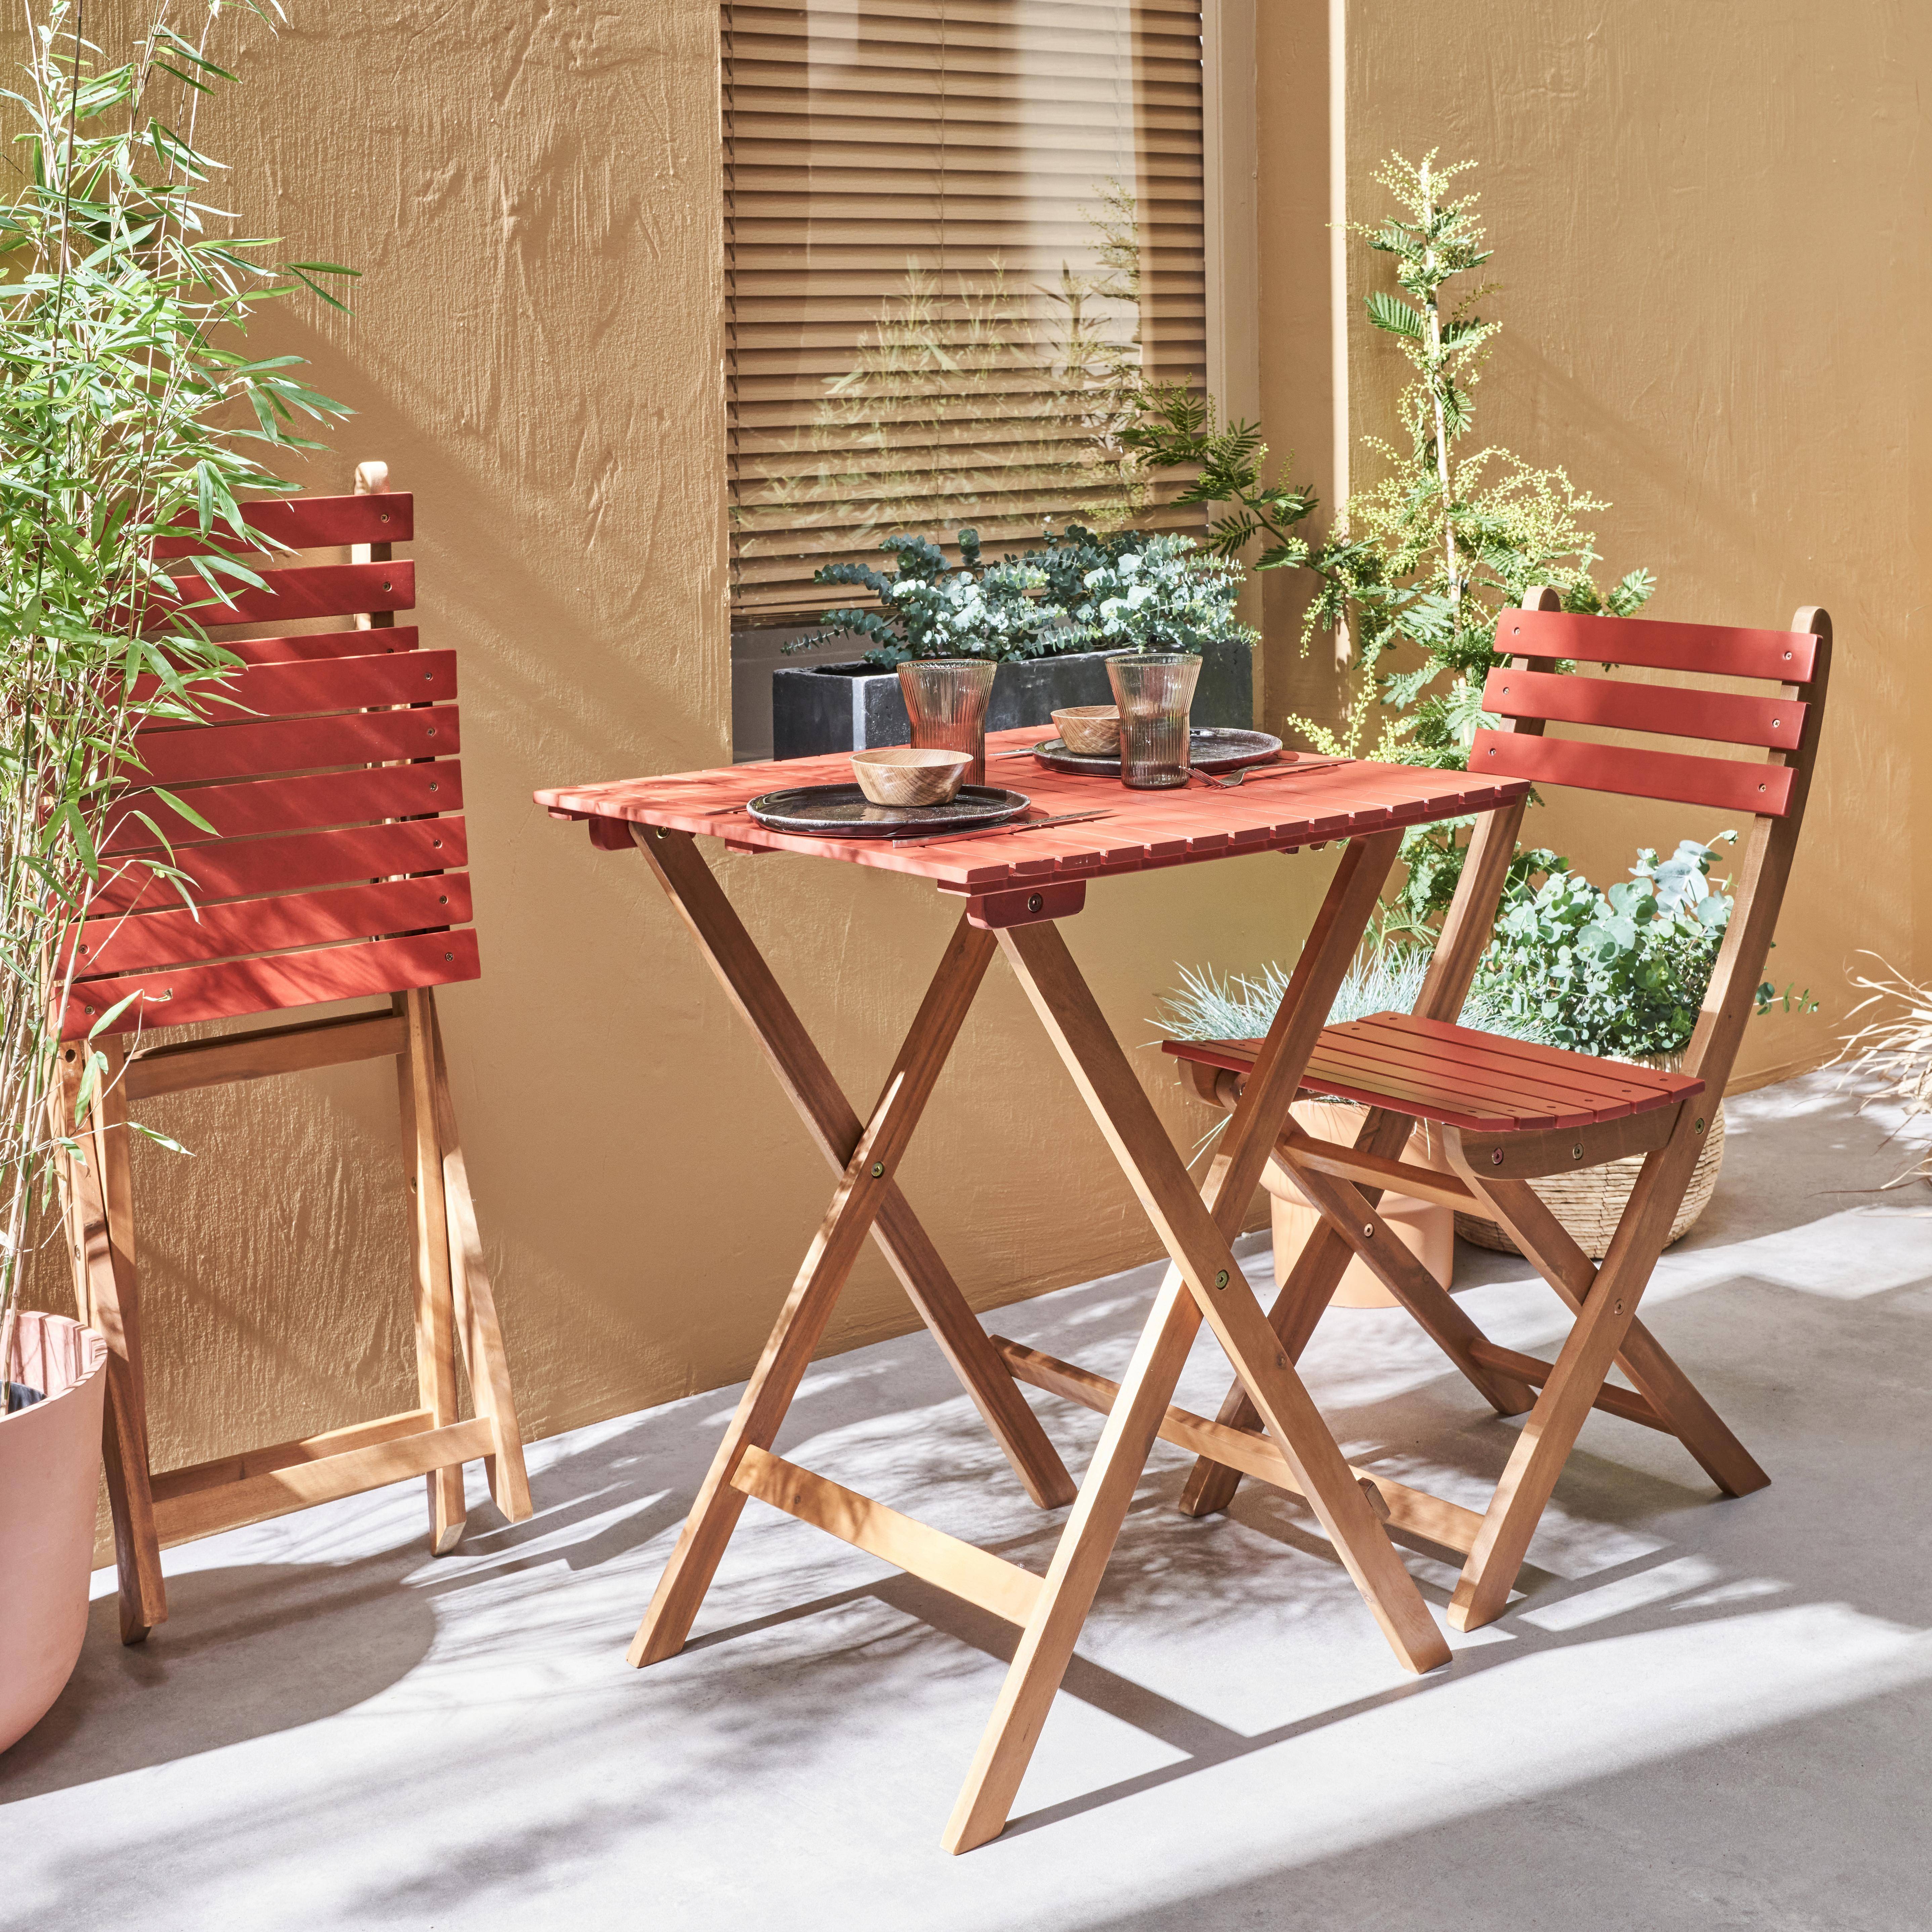 2-seater foldable wooden bistro garden table with chairs, 60x60cm - Barcelona - Terracotta Photo2